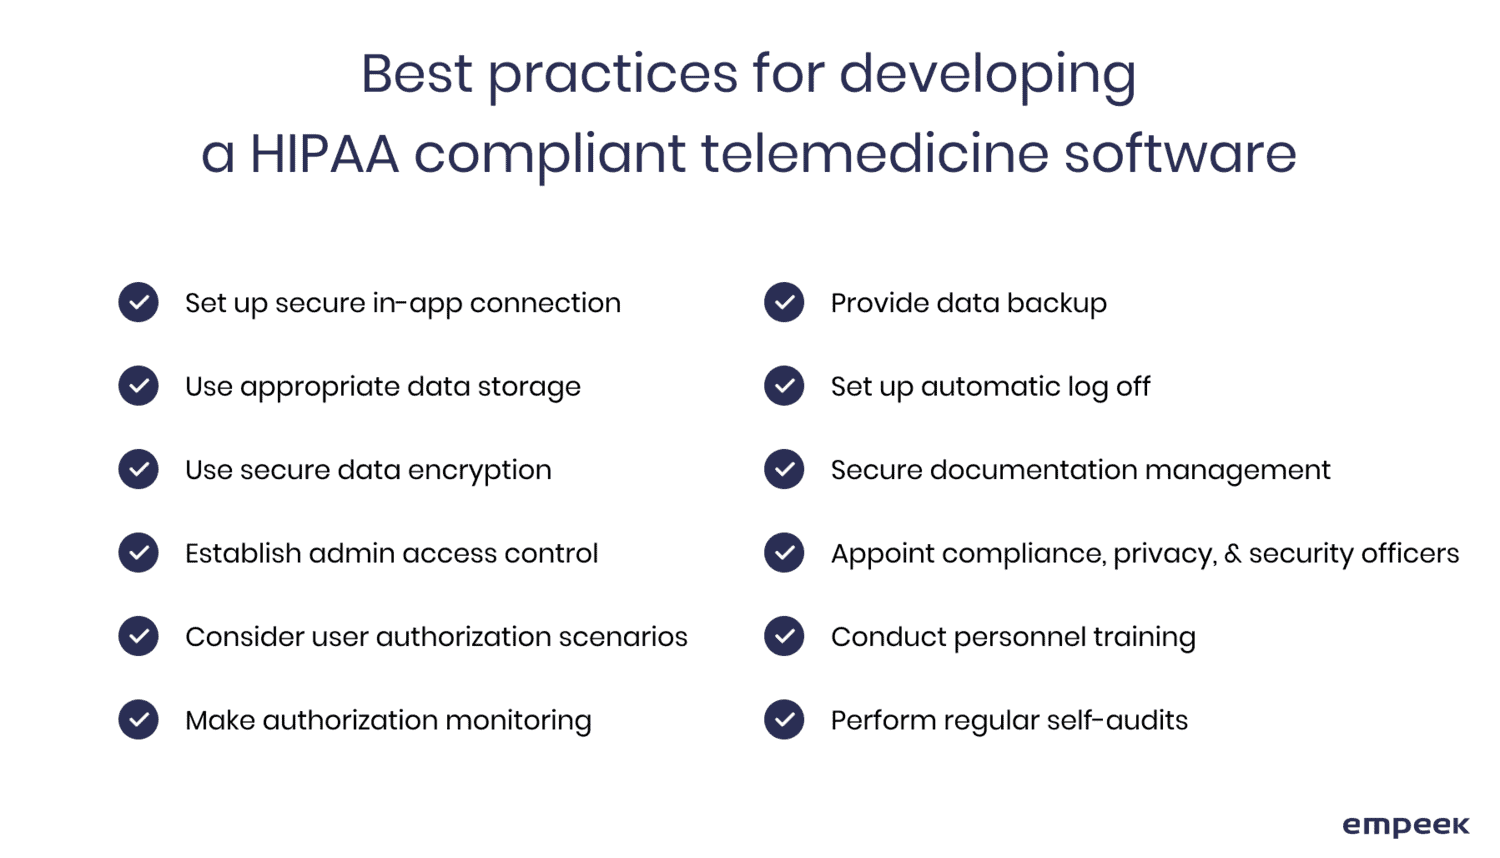 The list of best practices for developing a HIPAA compliant telemedicine software